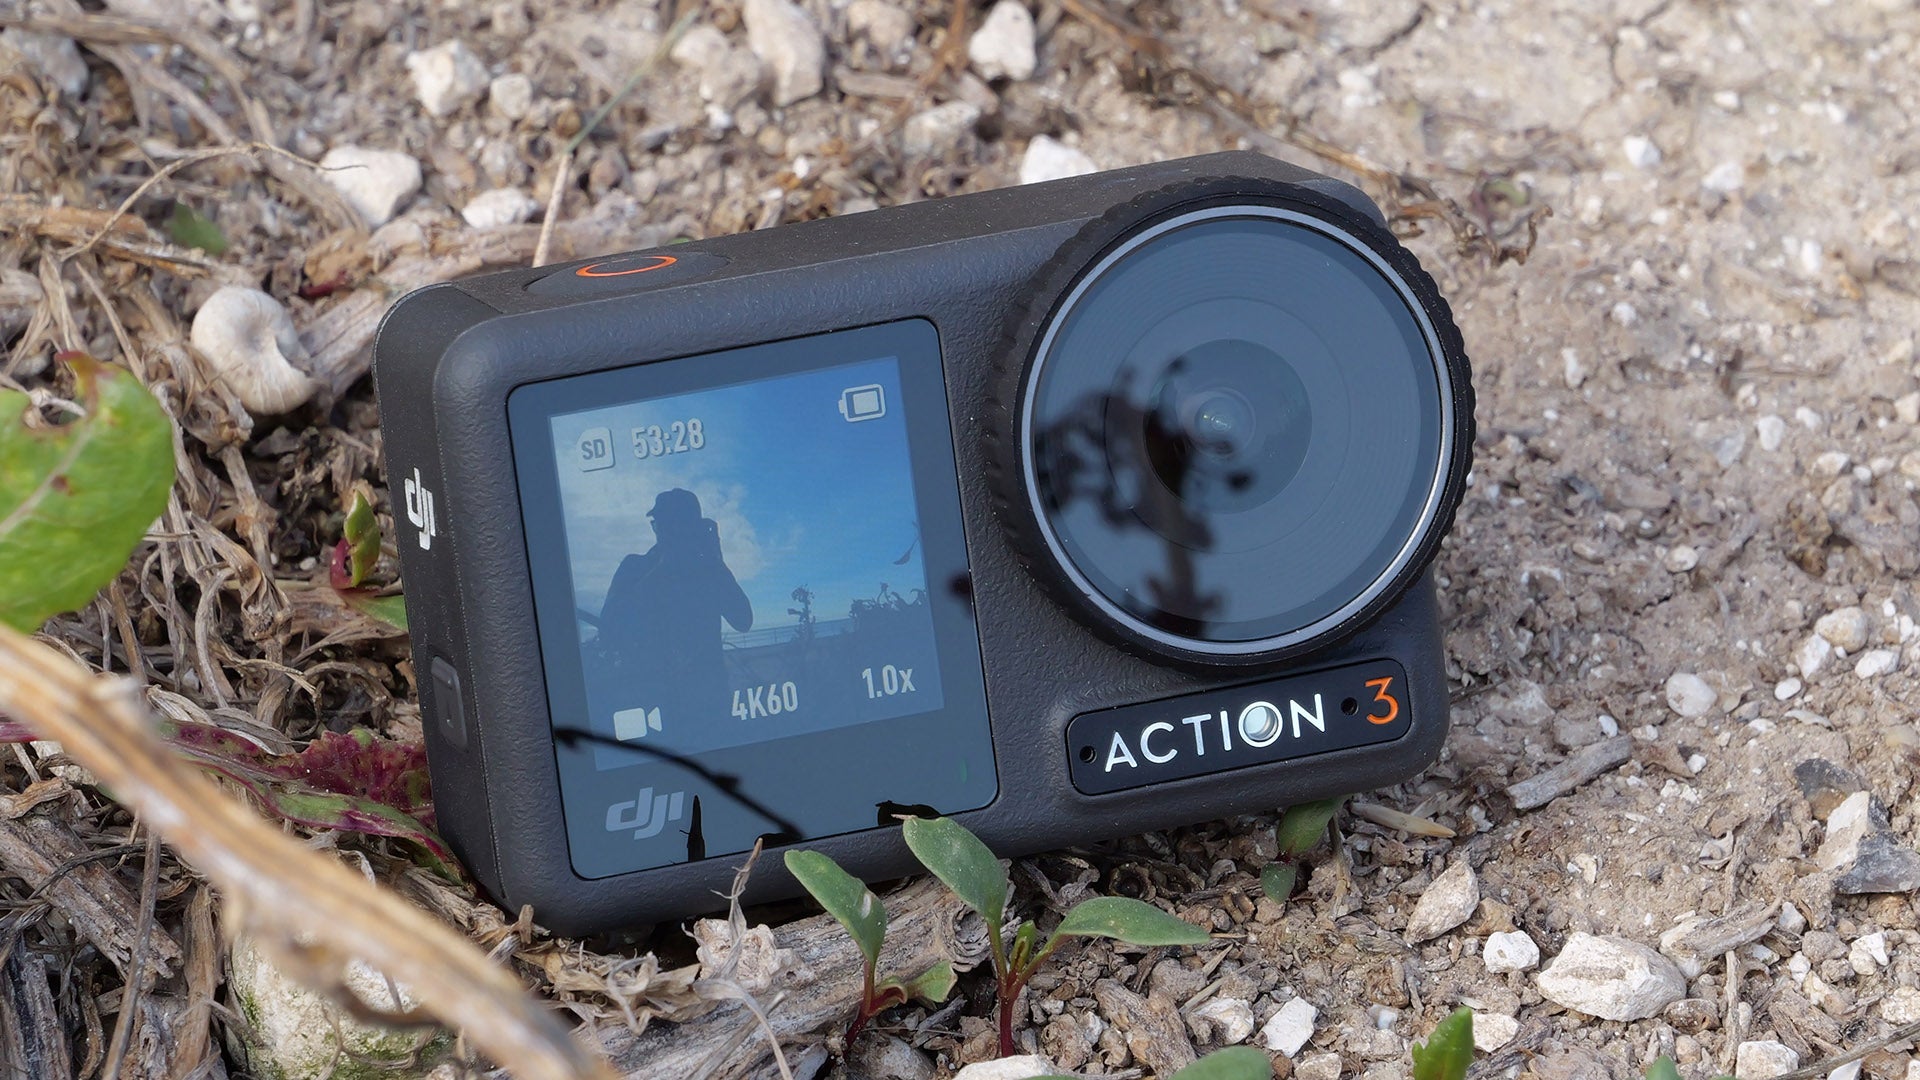 DJI Osmo Action 3 Review | Trusted Reviews